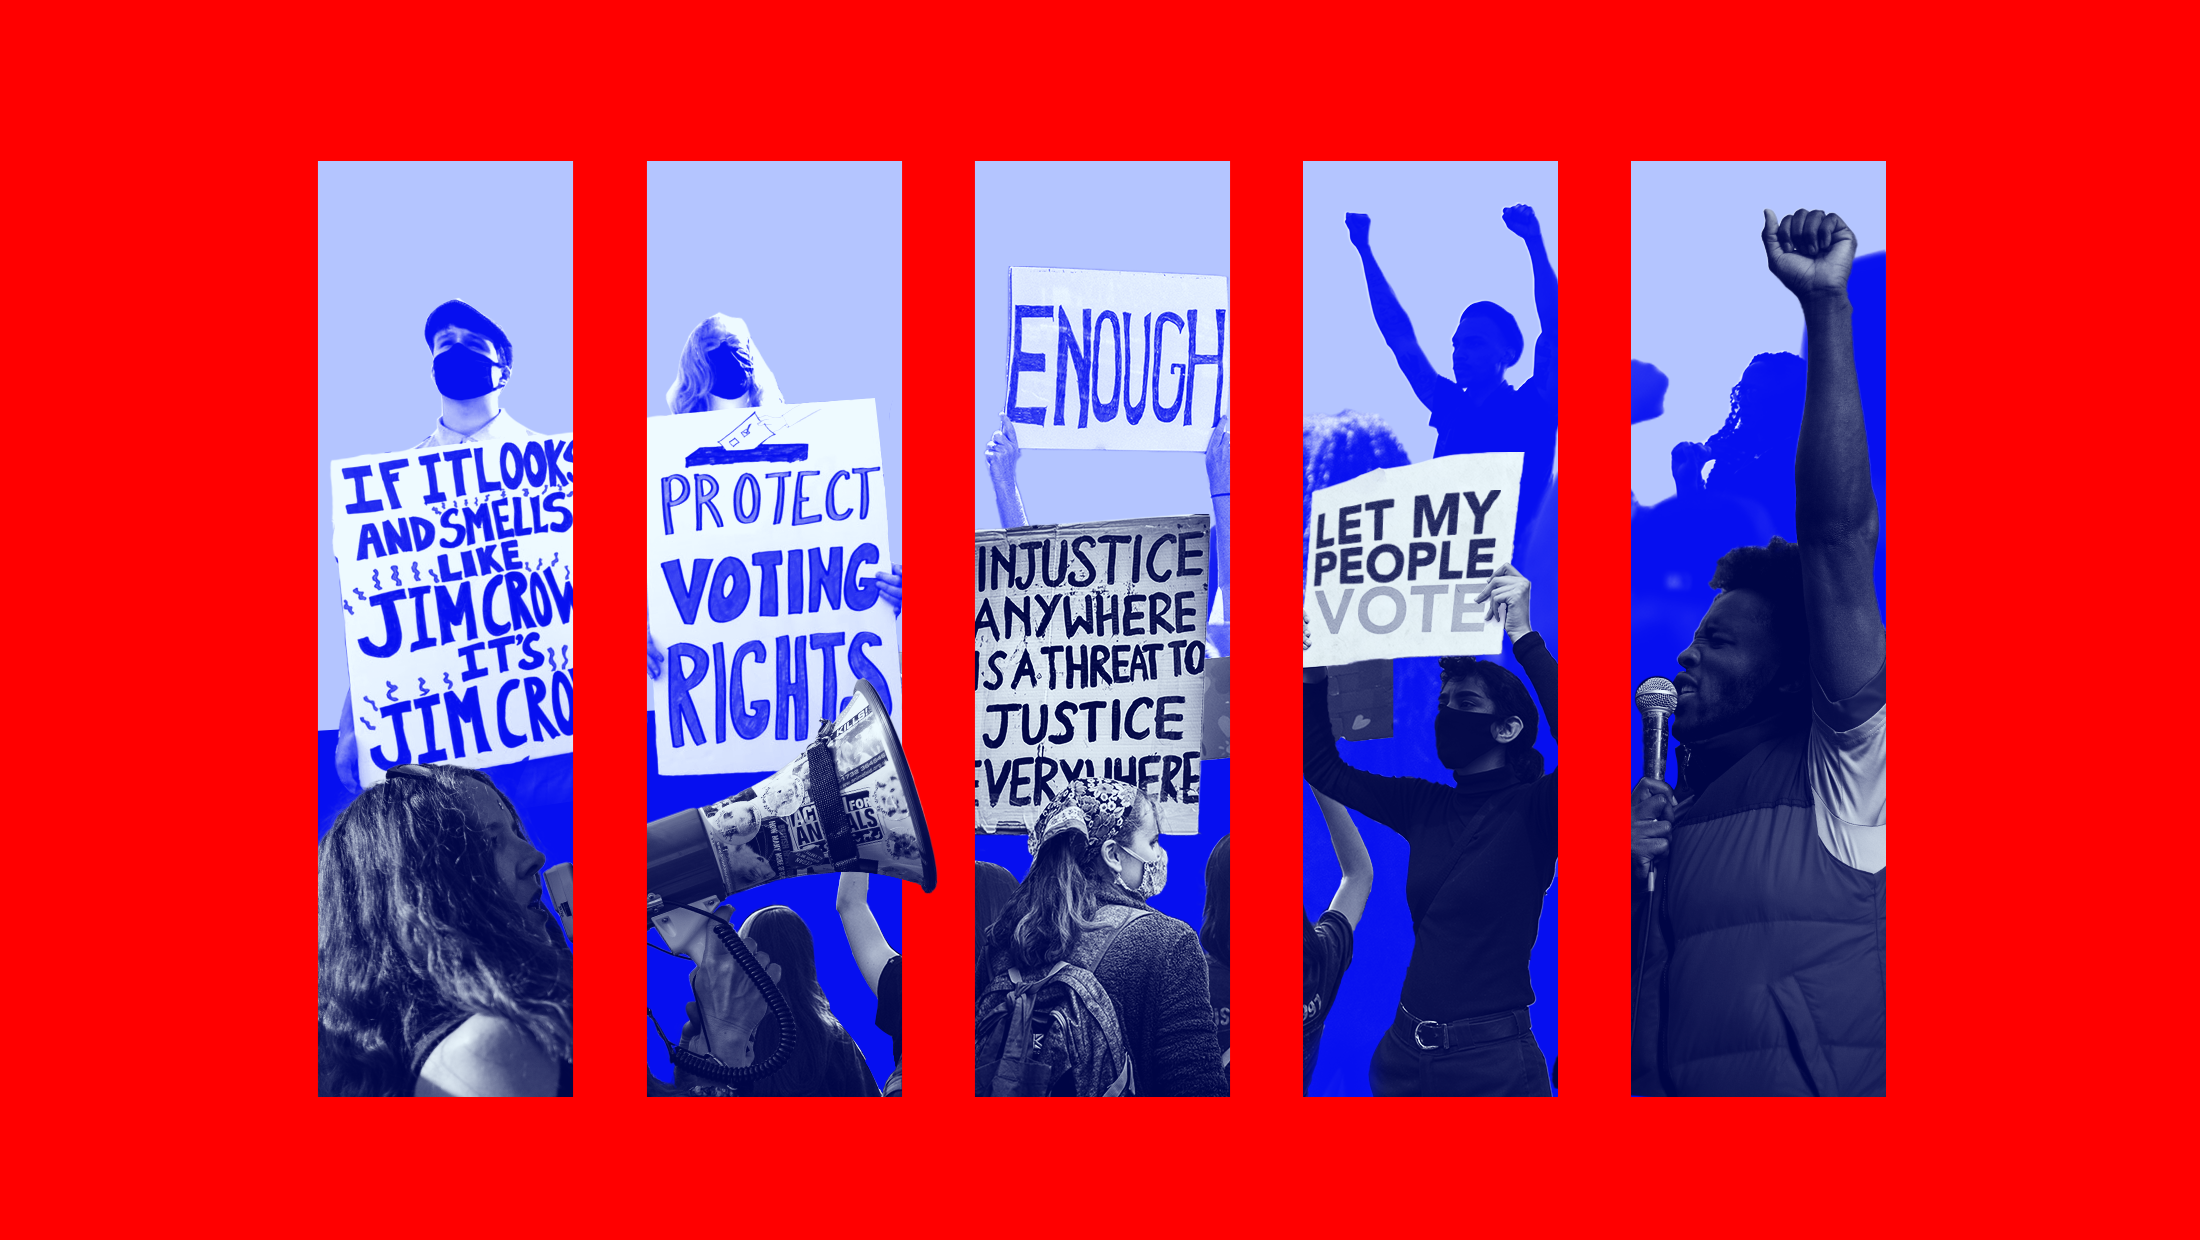 Red background with blue-toned images of protestors with signs that read "If it looks and smells like Jim Crow it's Jim Crow", "Protect voting rights", "injustice anywhere is a threat to justice everywhere", "enough", and "let my people vote" laid between five columns.